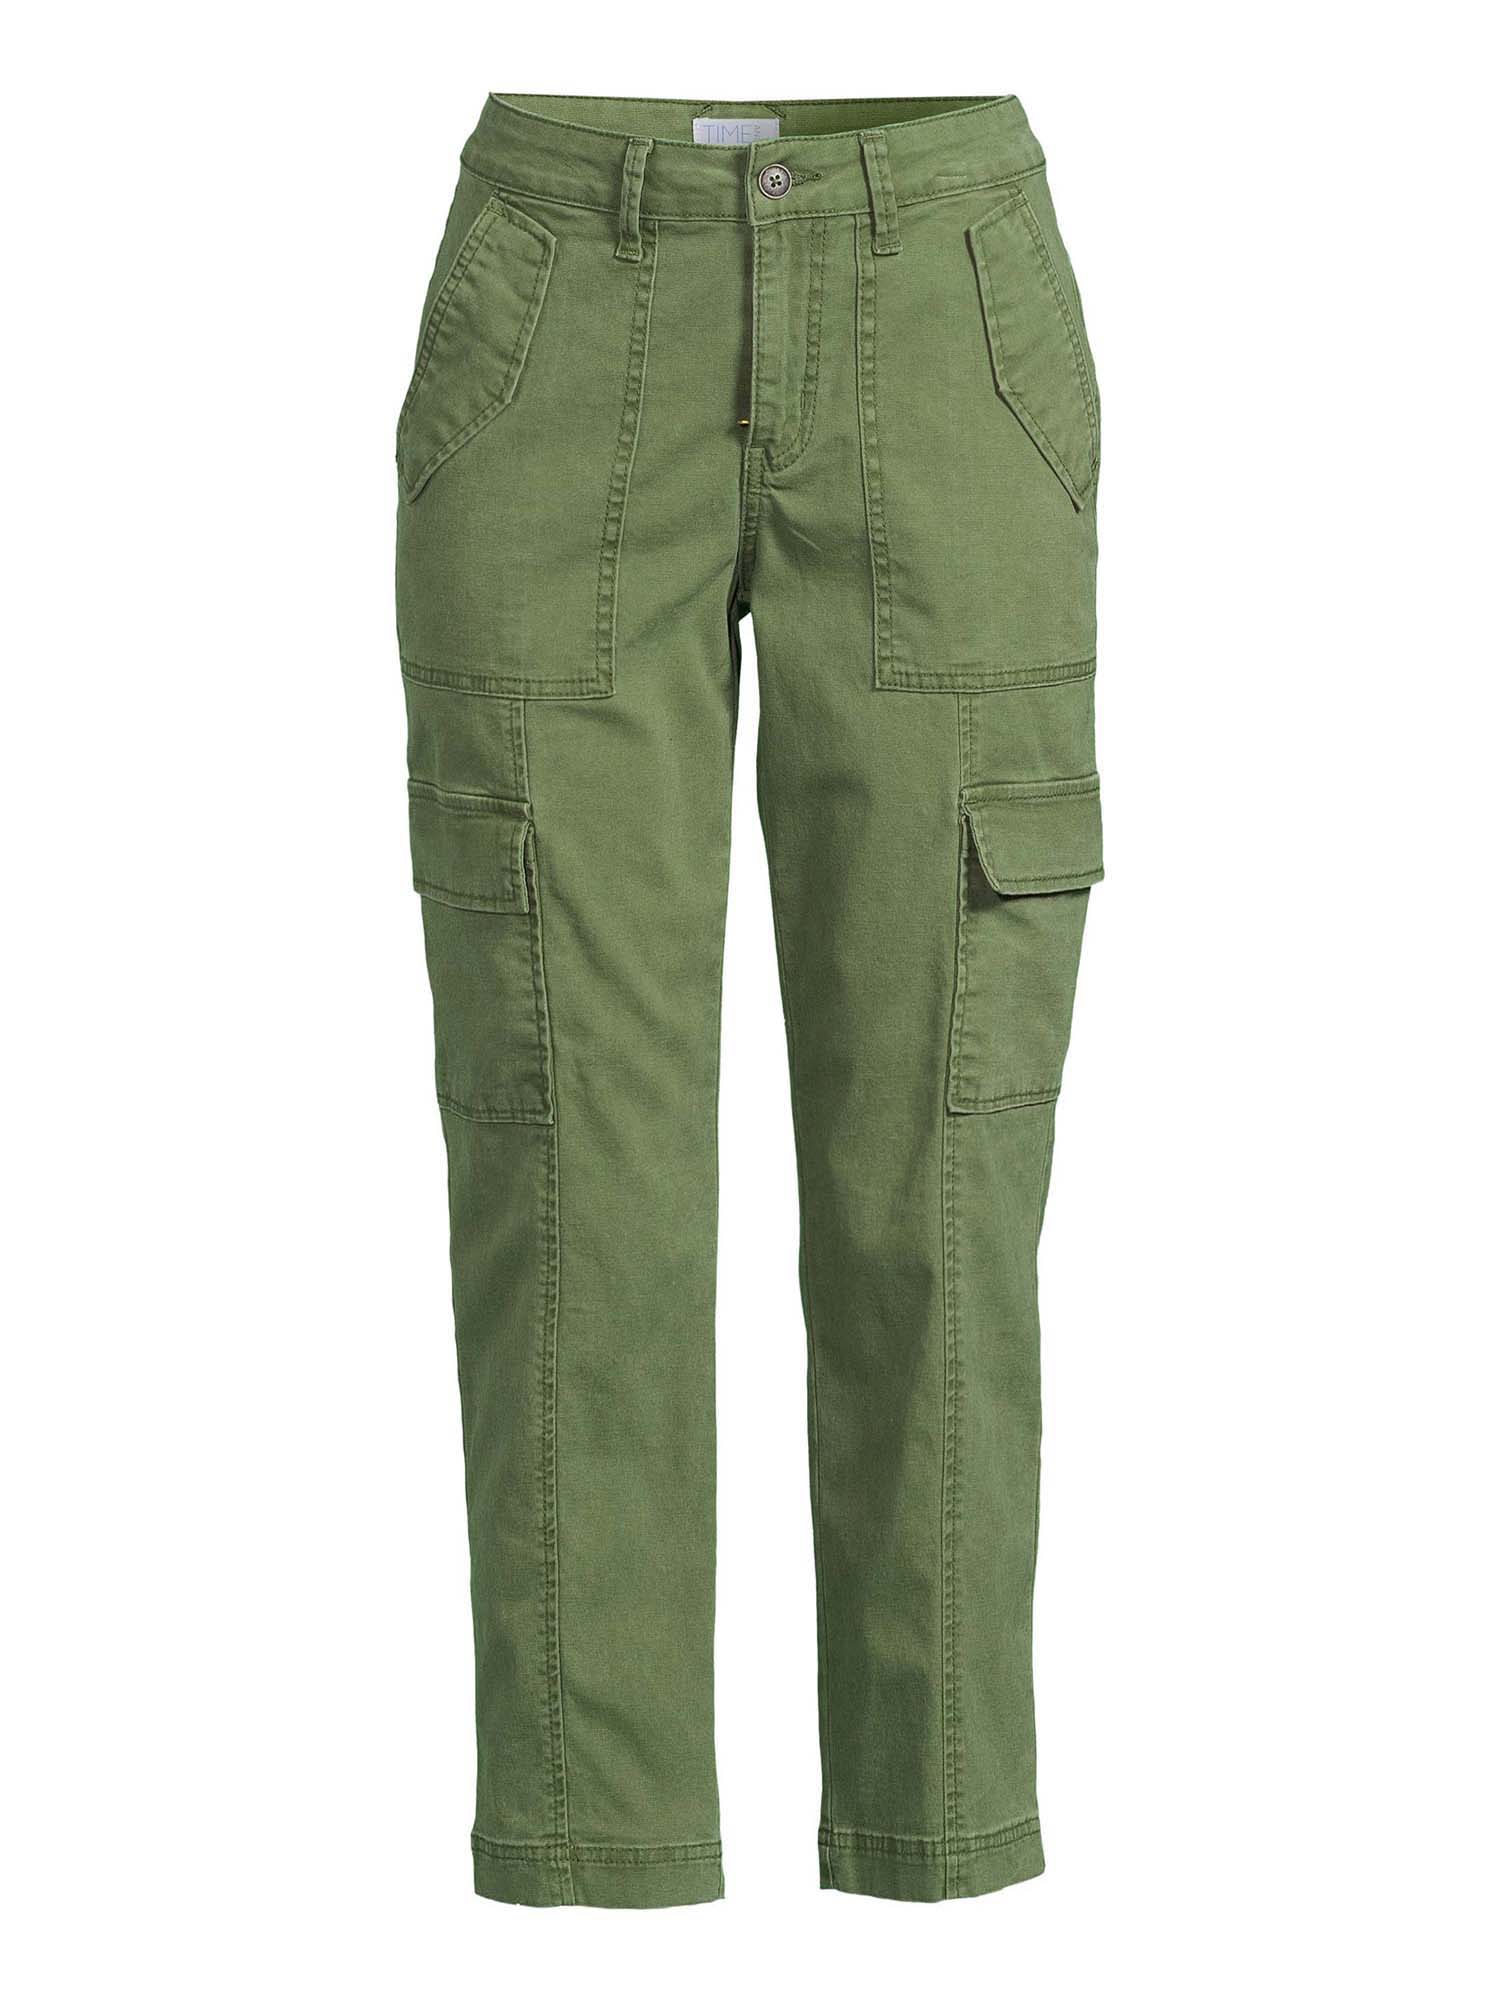 Time and Tru Women's Cargo Pants - image 5 of 5